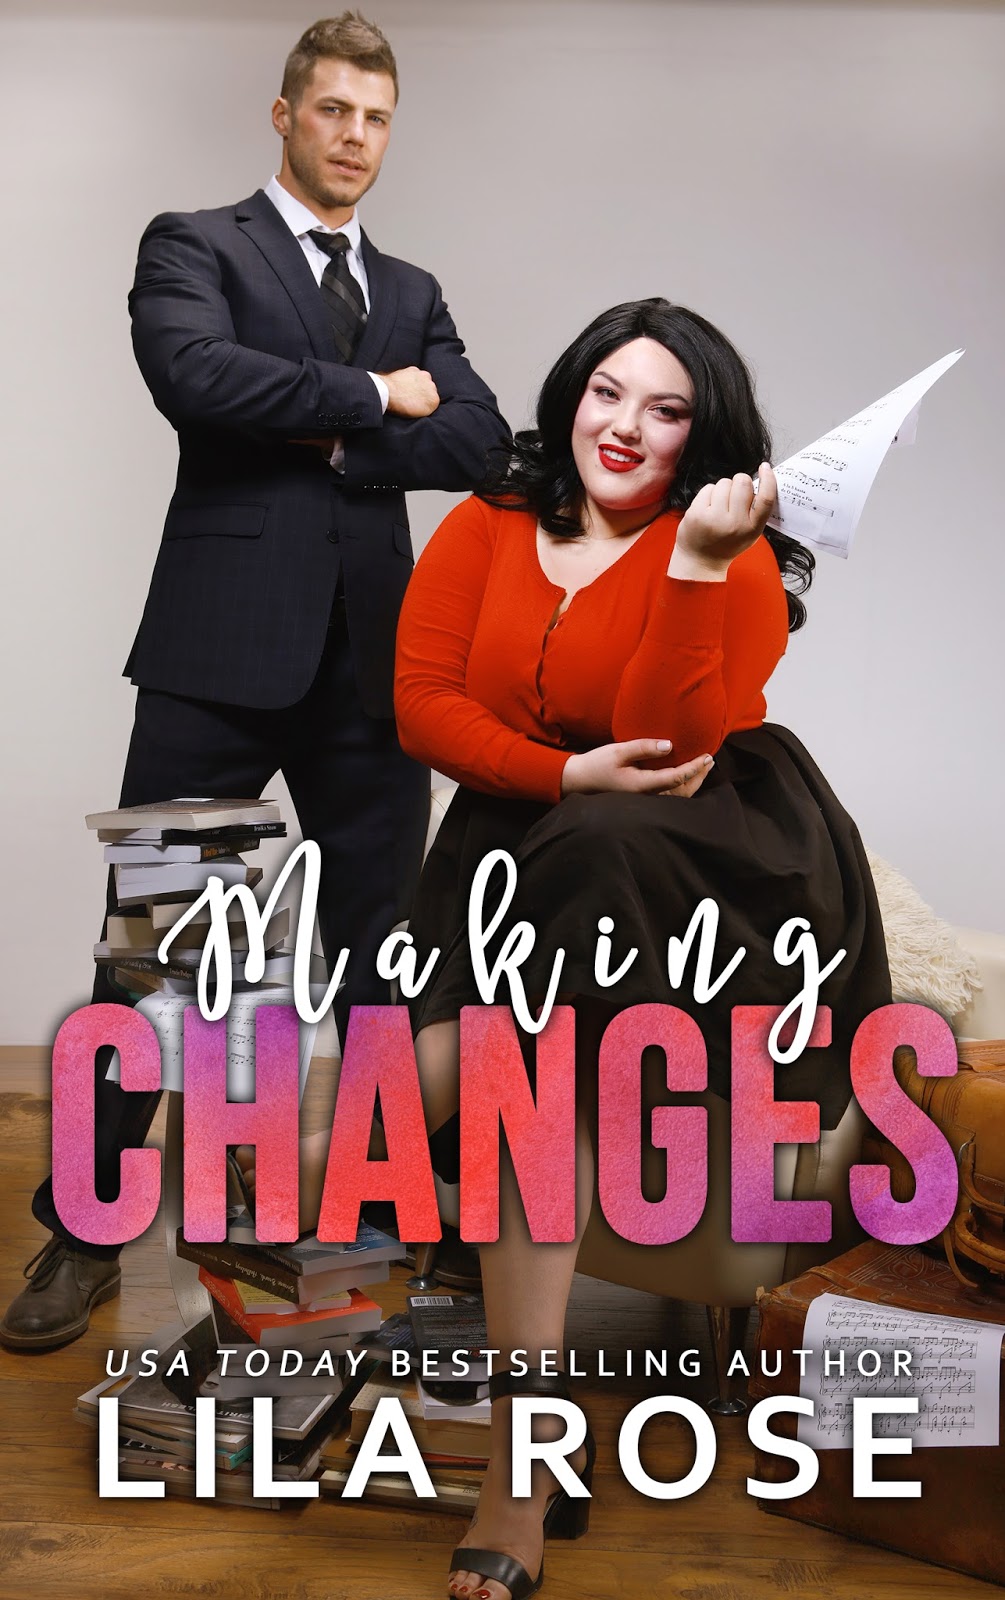 Lila Roses release blitz of Making Changes.